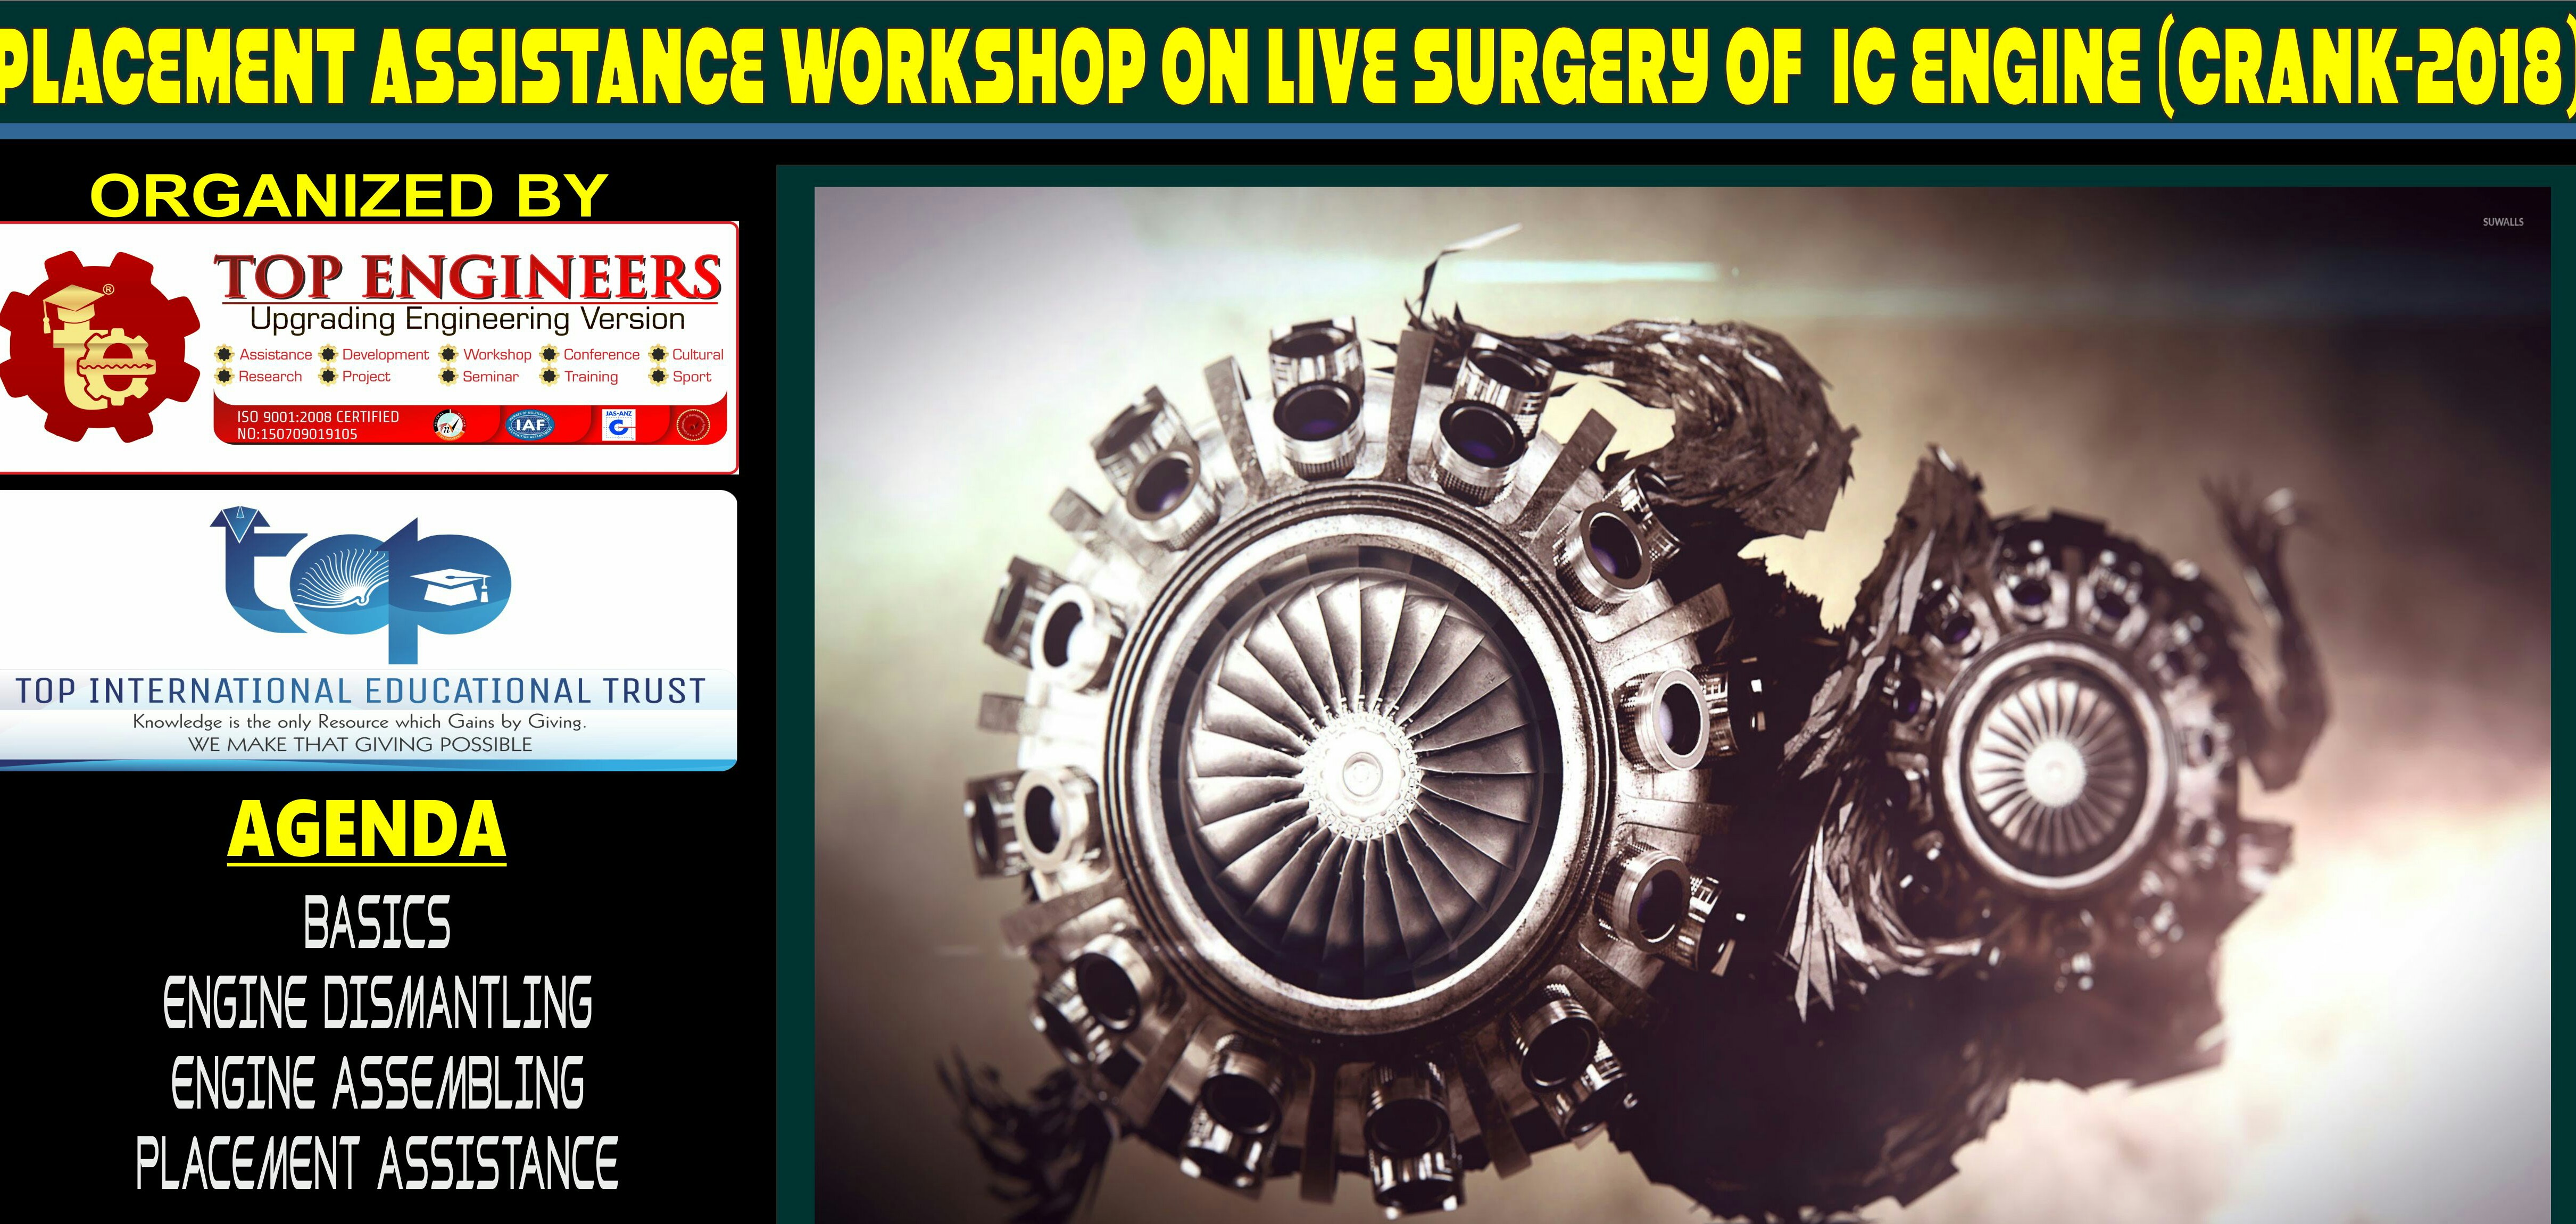 PLACEMENT ASSISTANCE WORKSHOP ON LIVE SURGERY OF IC ENGINE (CRANK-2018), Chennai, Tamil Nadu, India